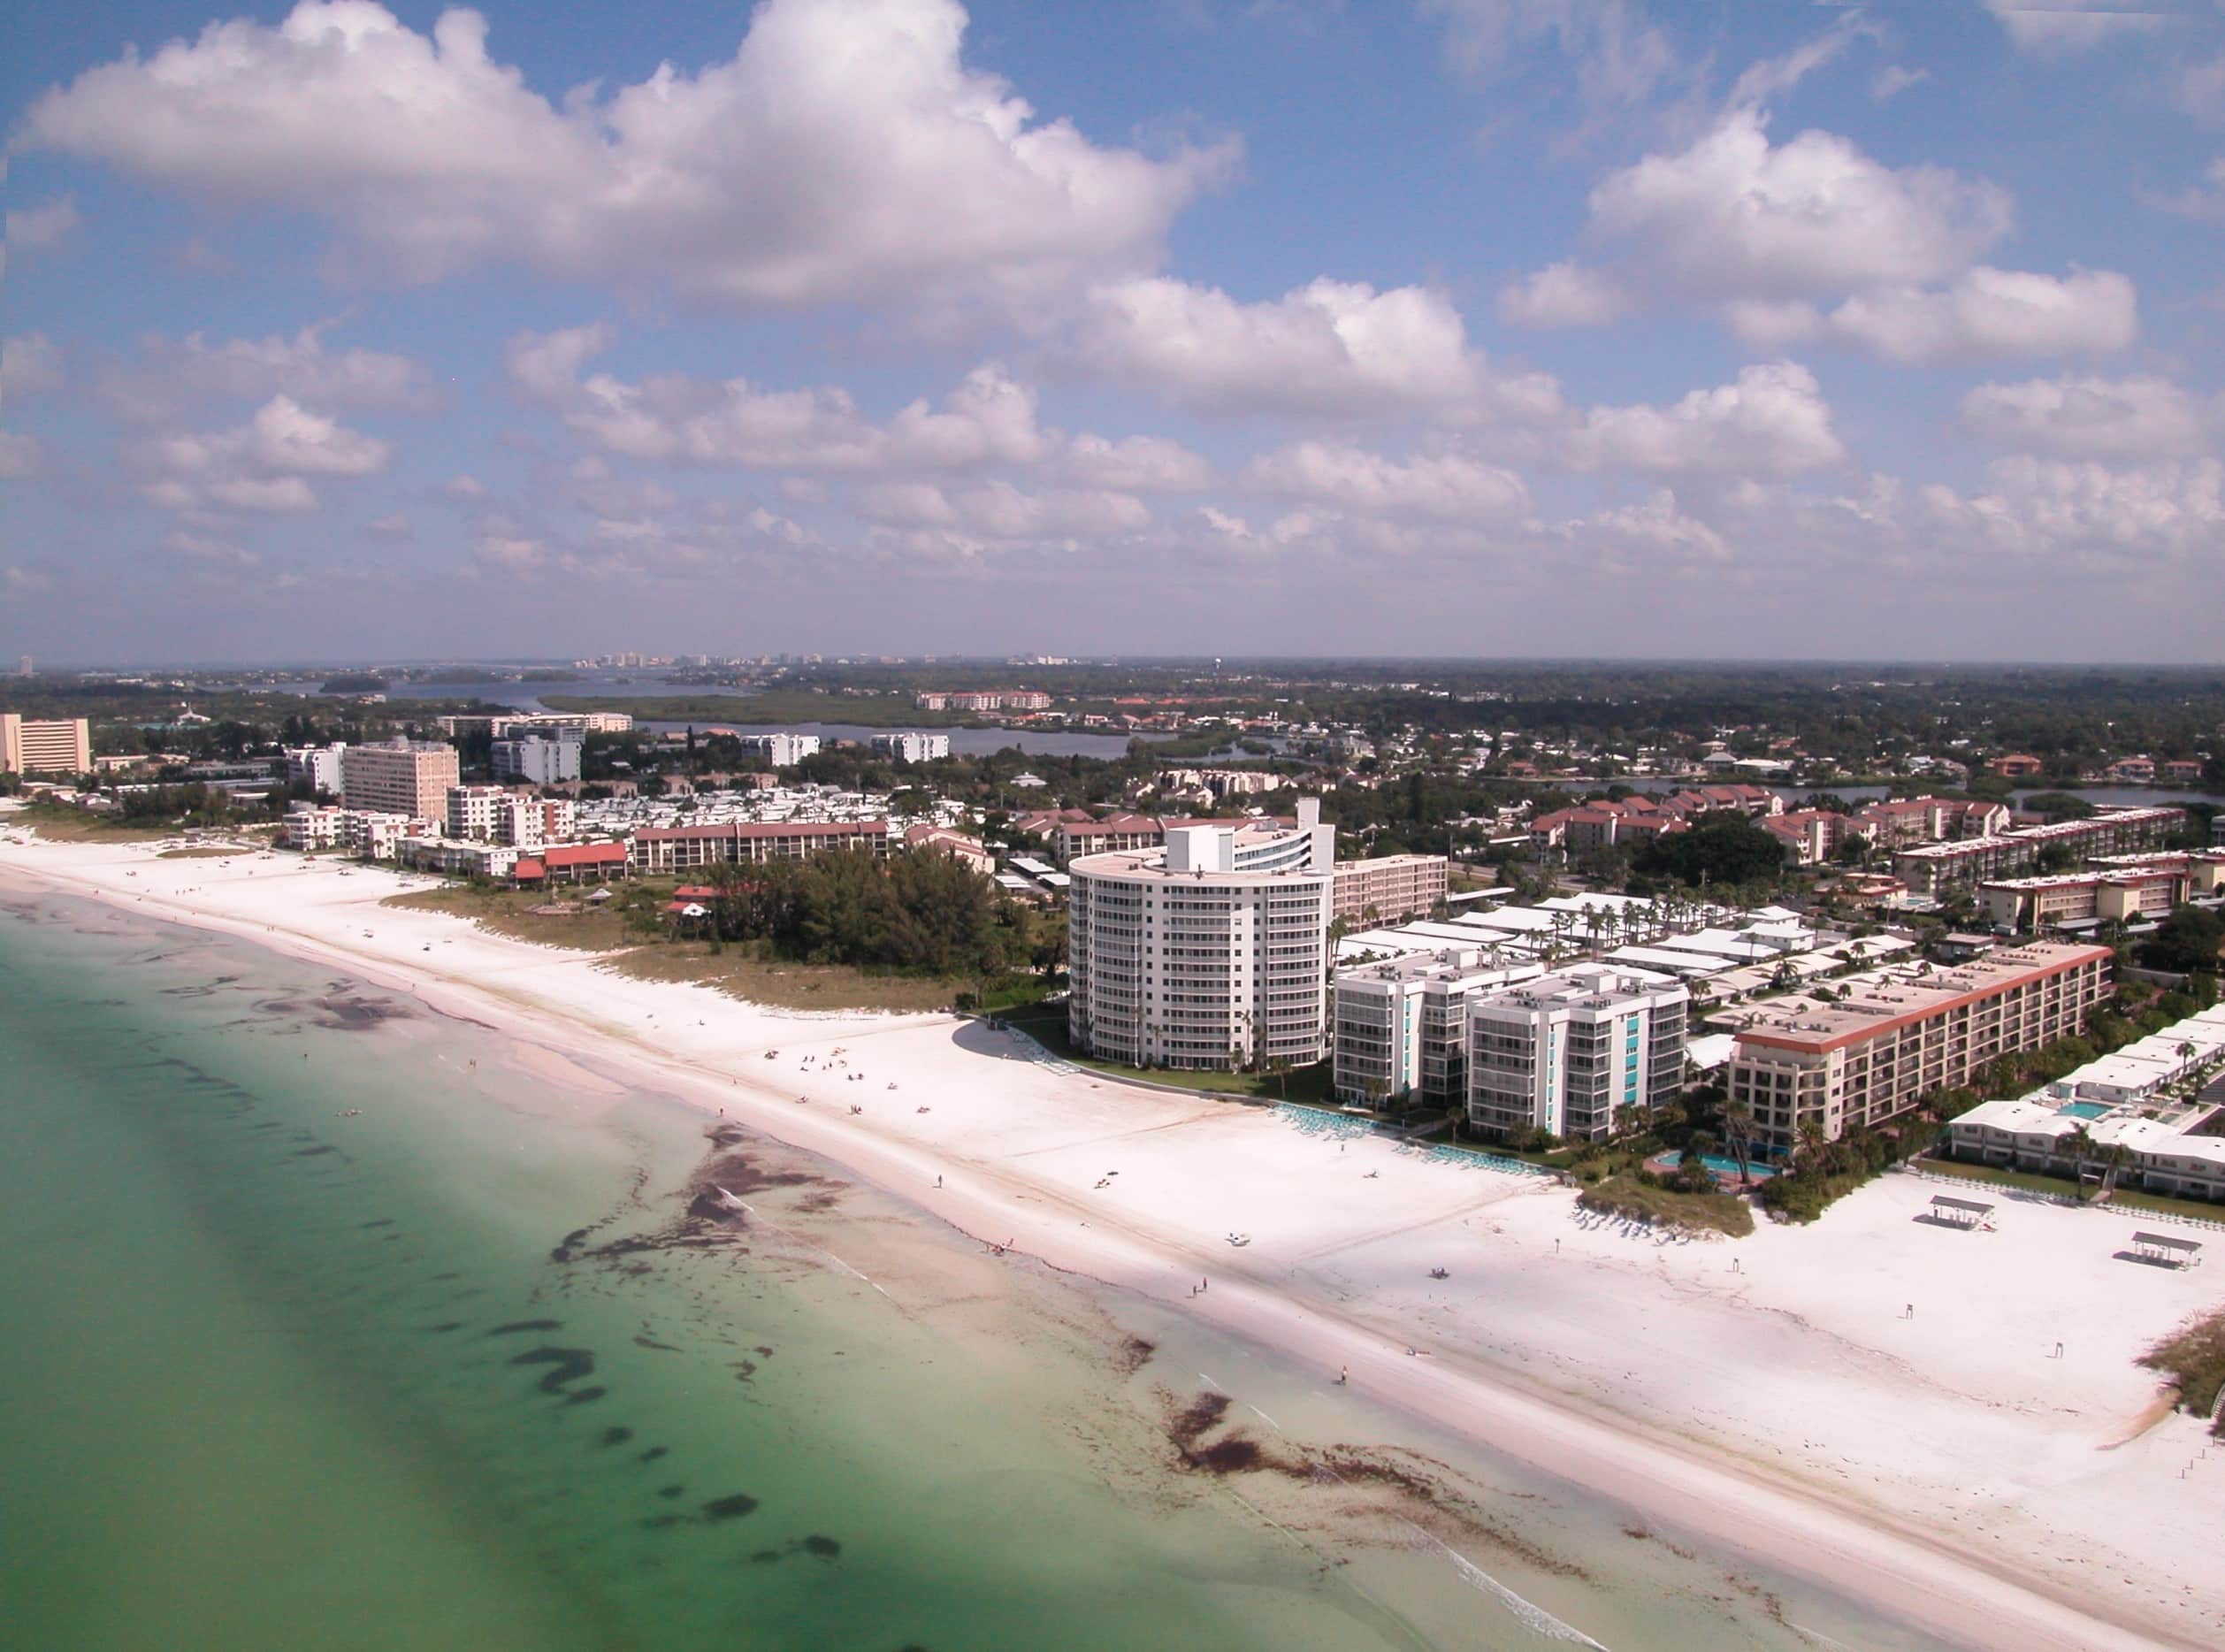 Crystal Sands In Siesta Key Condos For Sale On The Beach